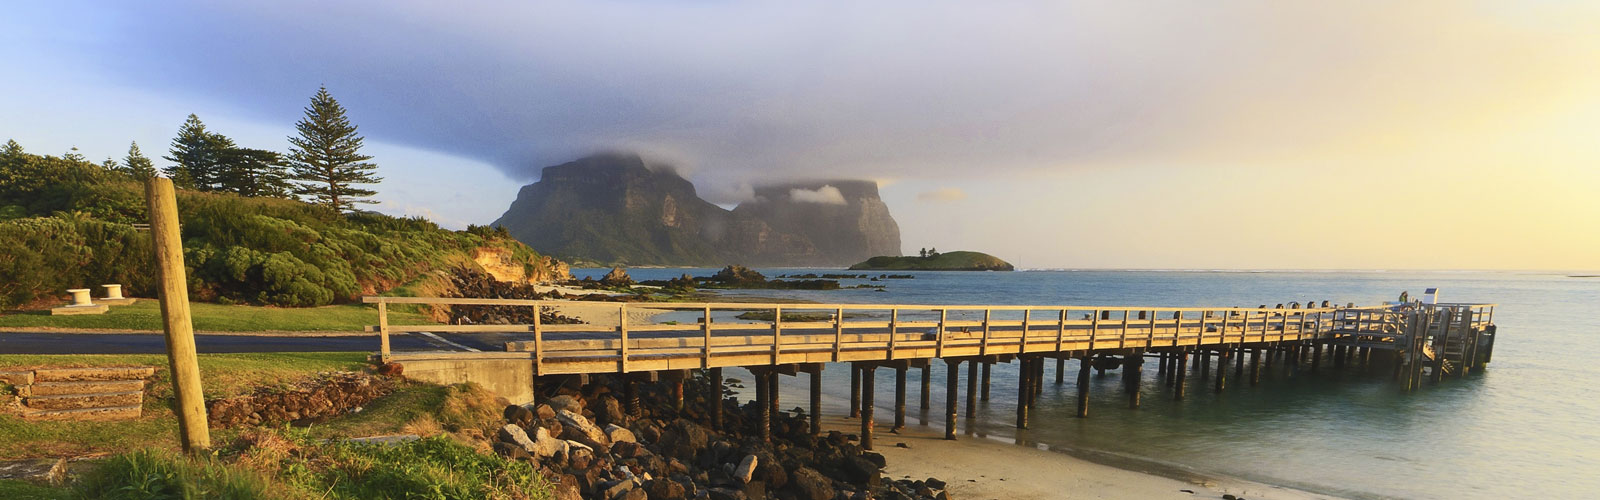 Lord Howe Island Weather and Climate